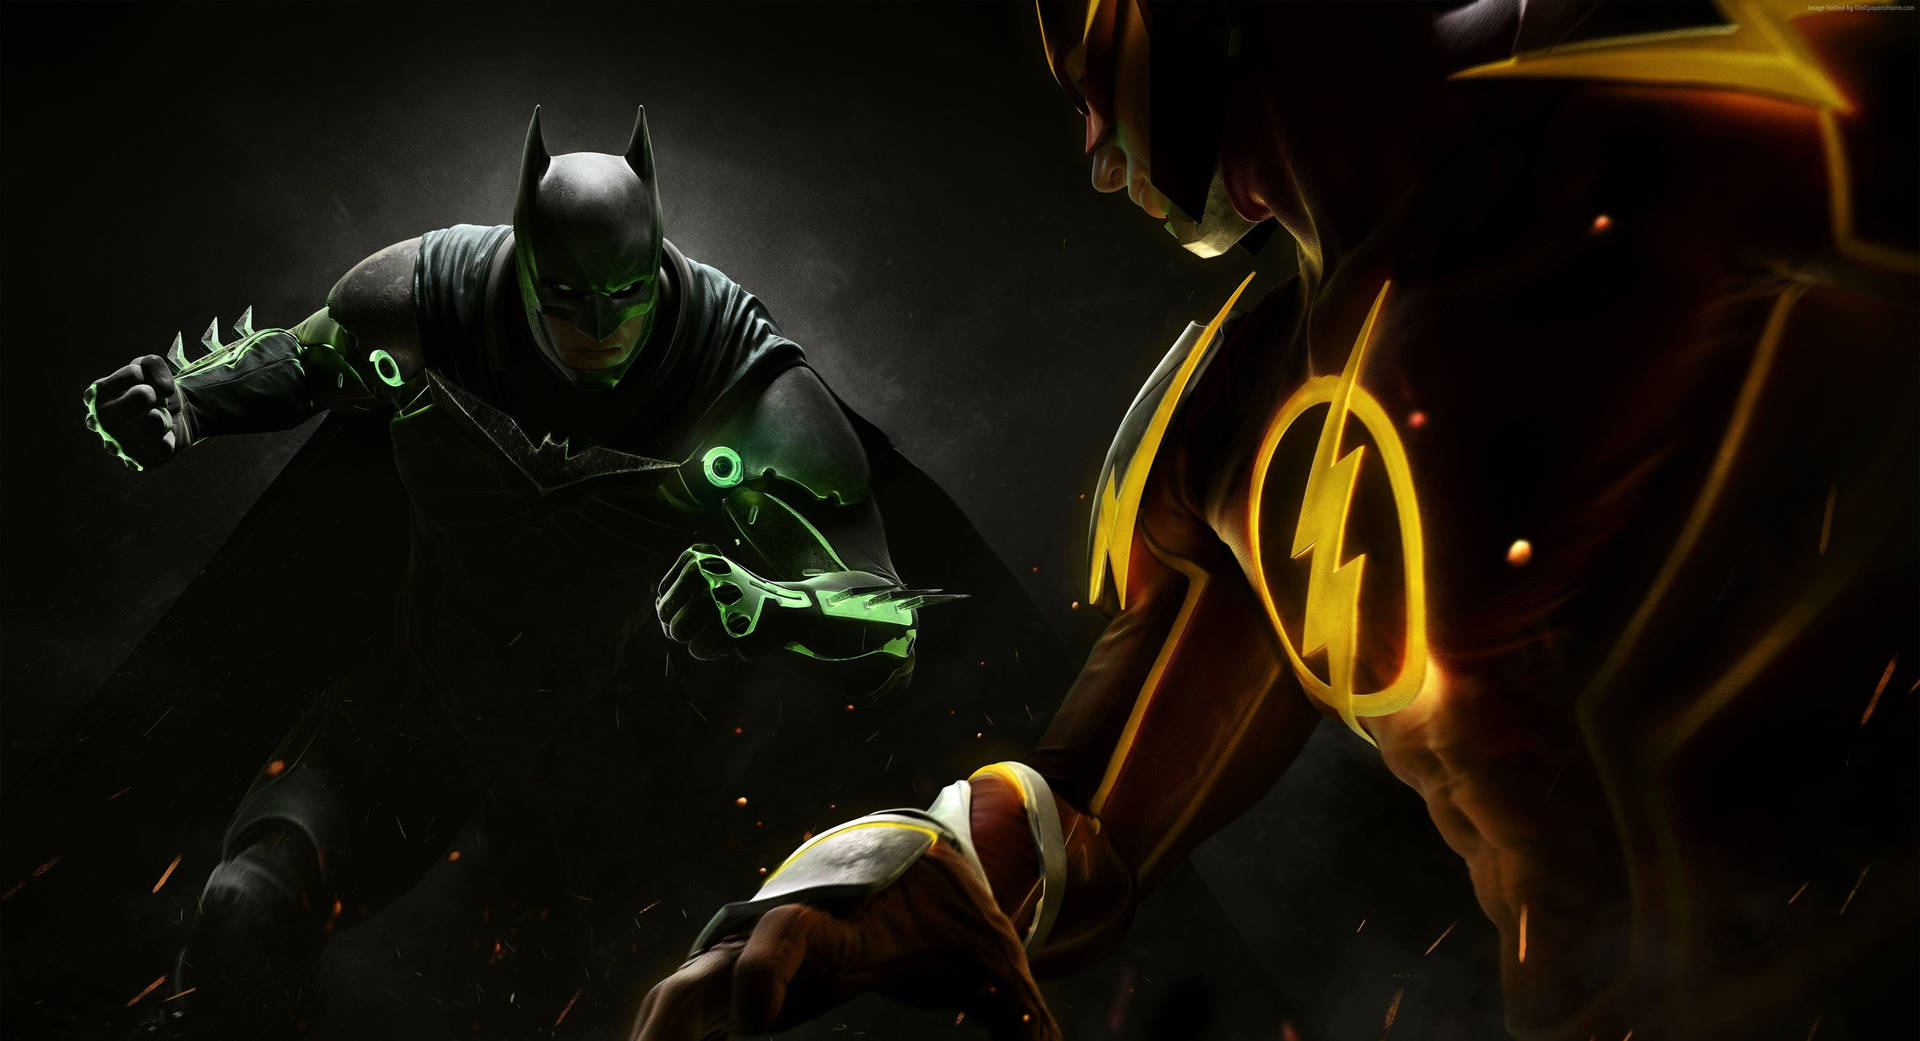 Batman And Flash In Battle 4k Ps4 Background